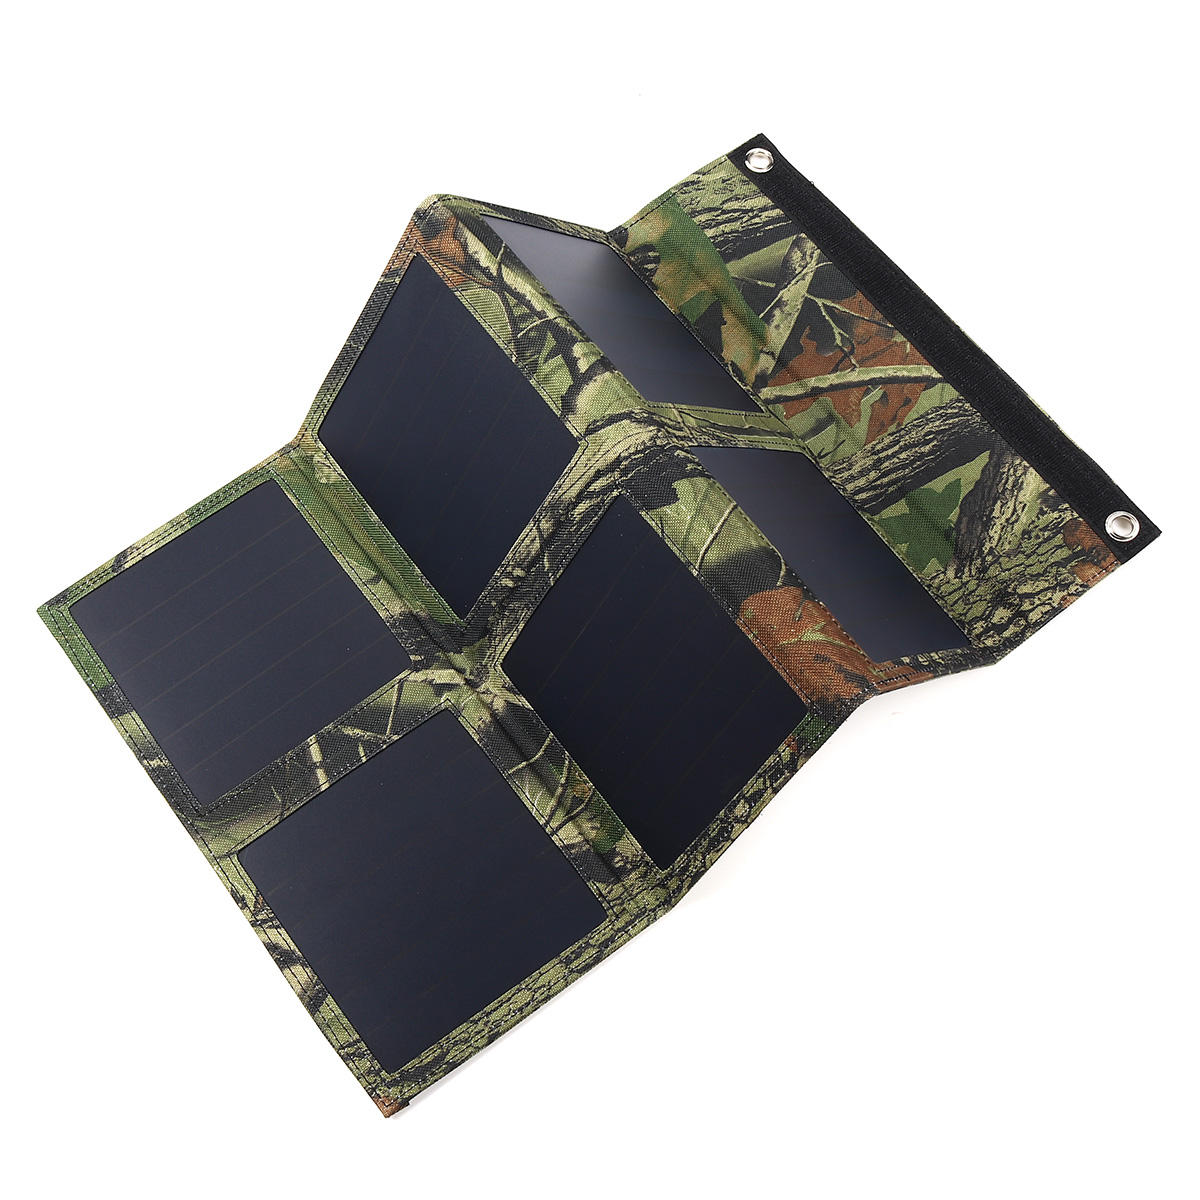 

25W 5V Foldable Solar Panel Charger Solar Power Bank Dual USB Camouflage Backpack Camping Hiking for Huawei iPhone Samsu